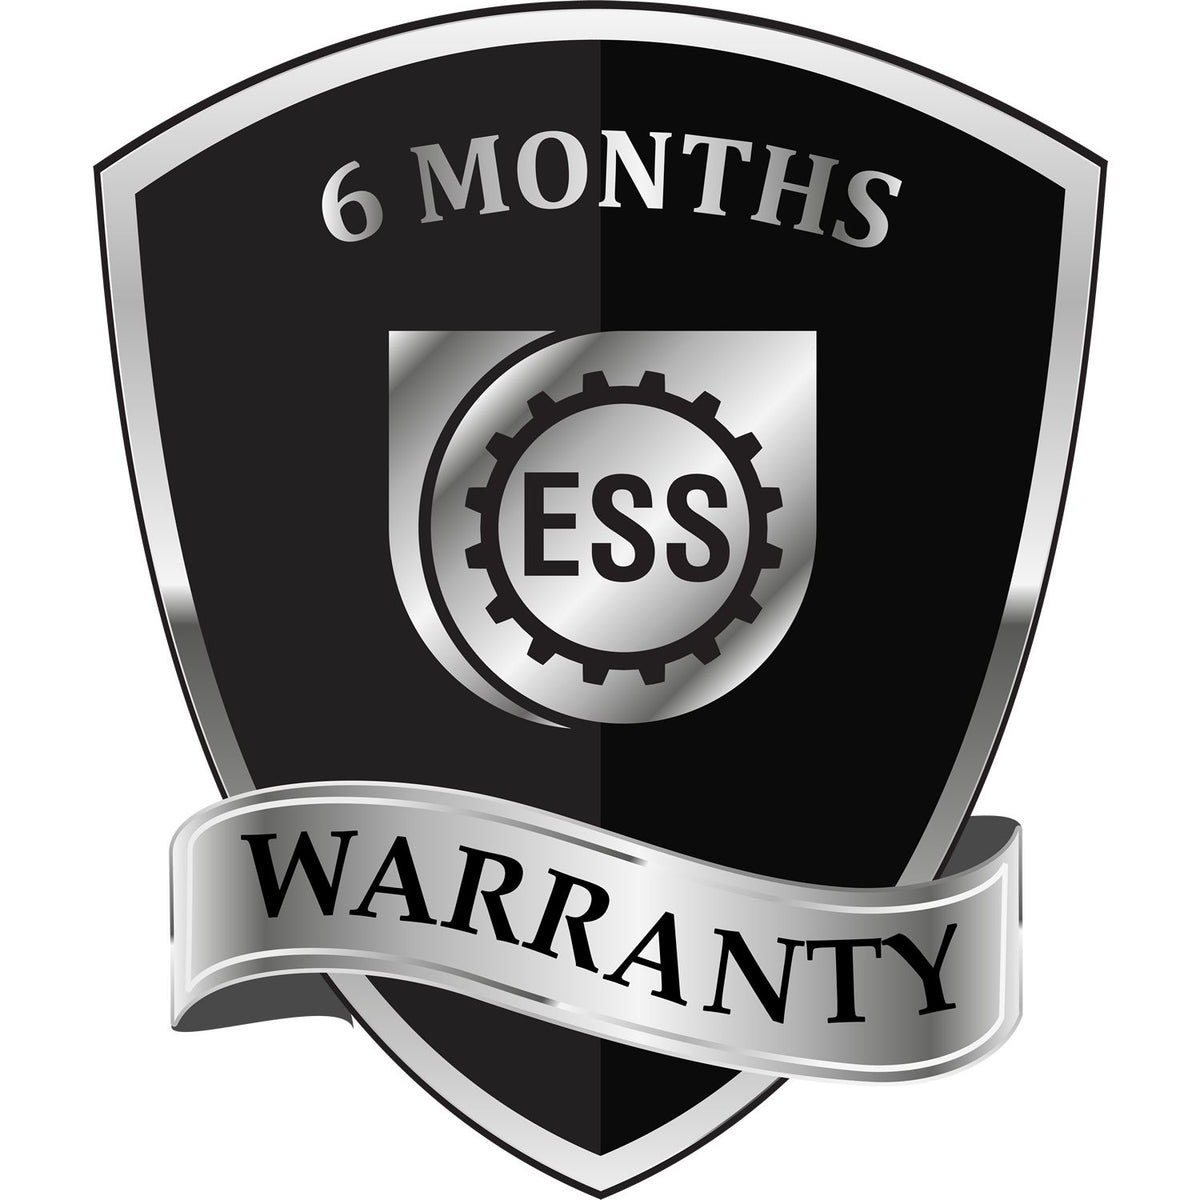 A badge or emblem showing a warranty icon for the Minnesota Professional Engineer Seal Stamp